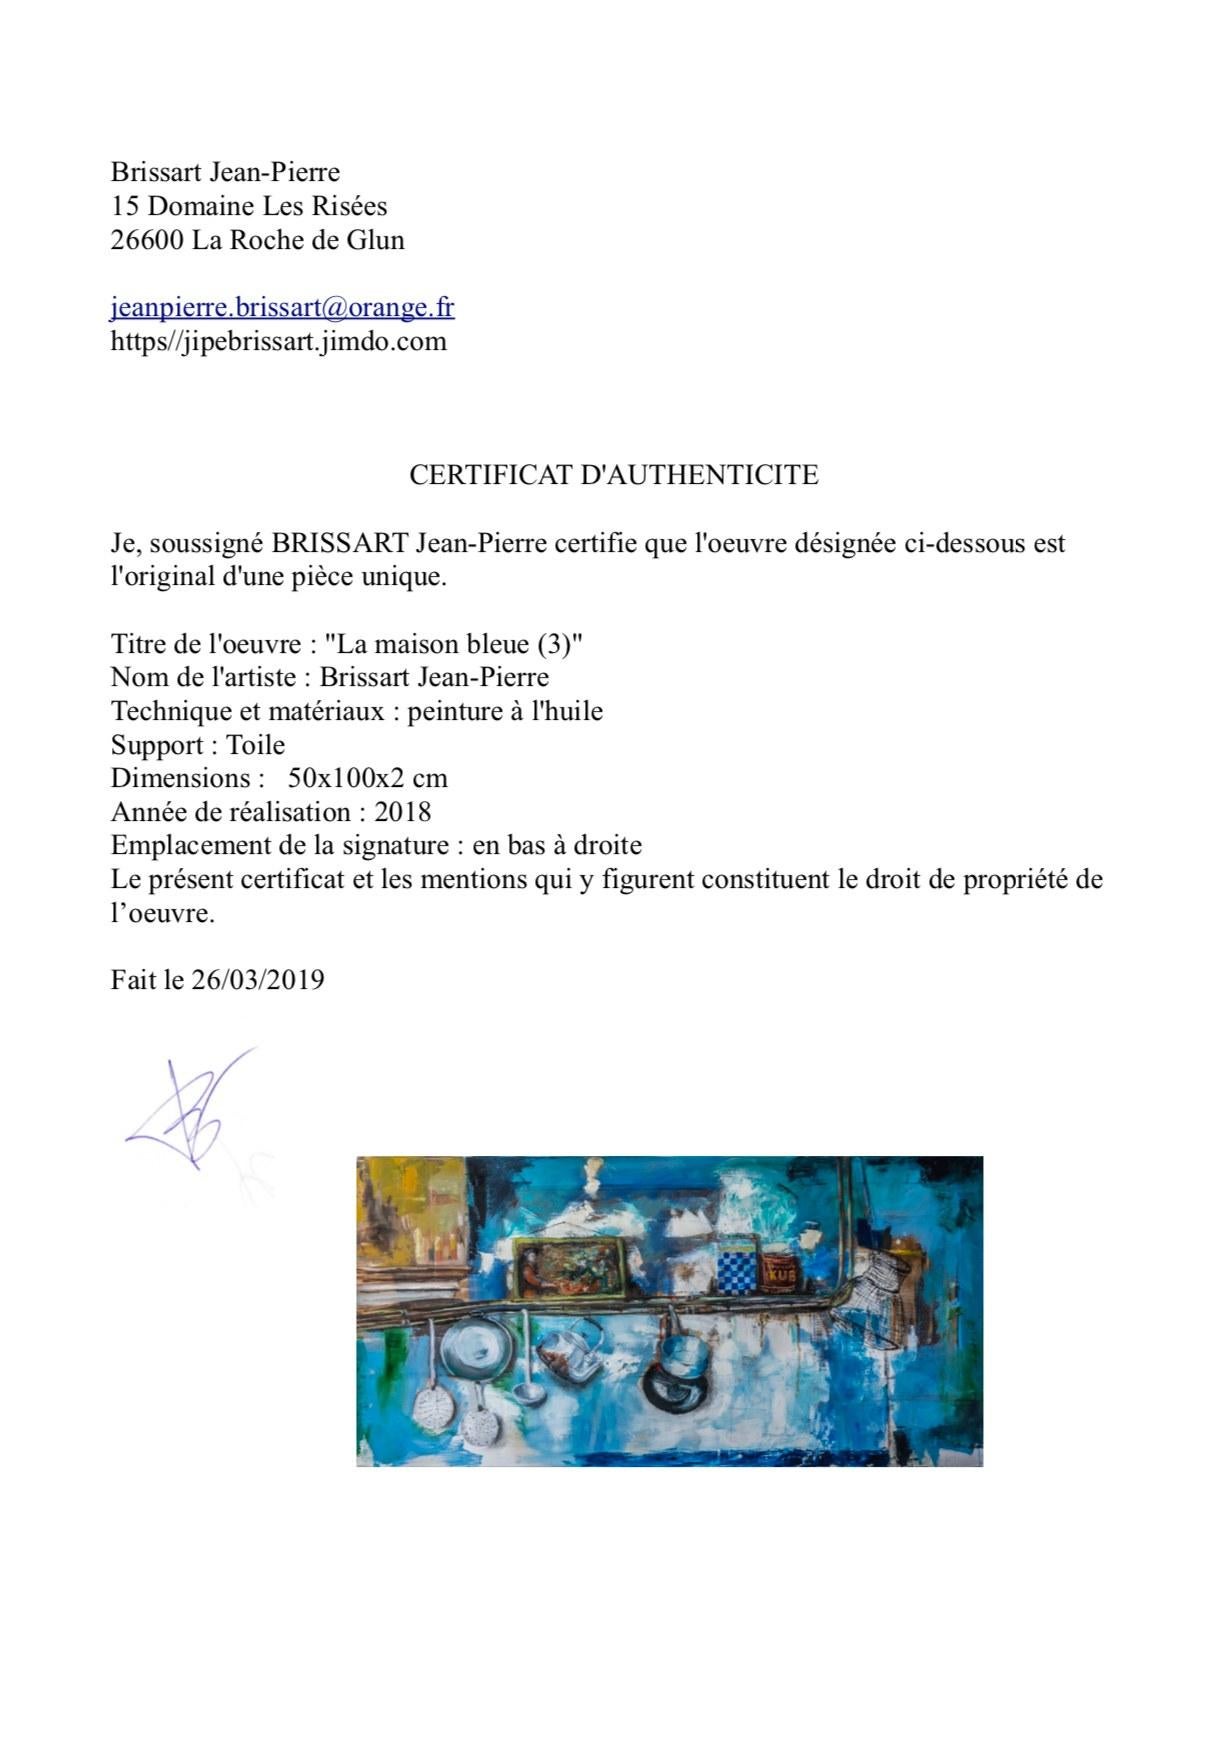 The blue house 3
2018
Oil on canvas
50x100
Certificate of the artist
390 €